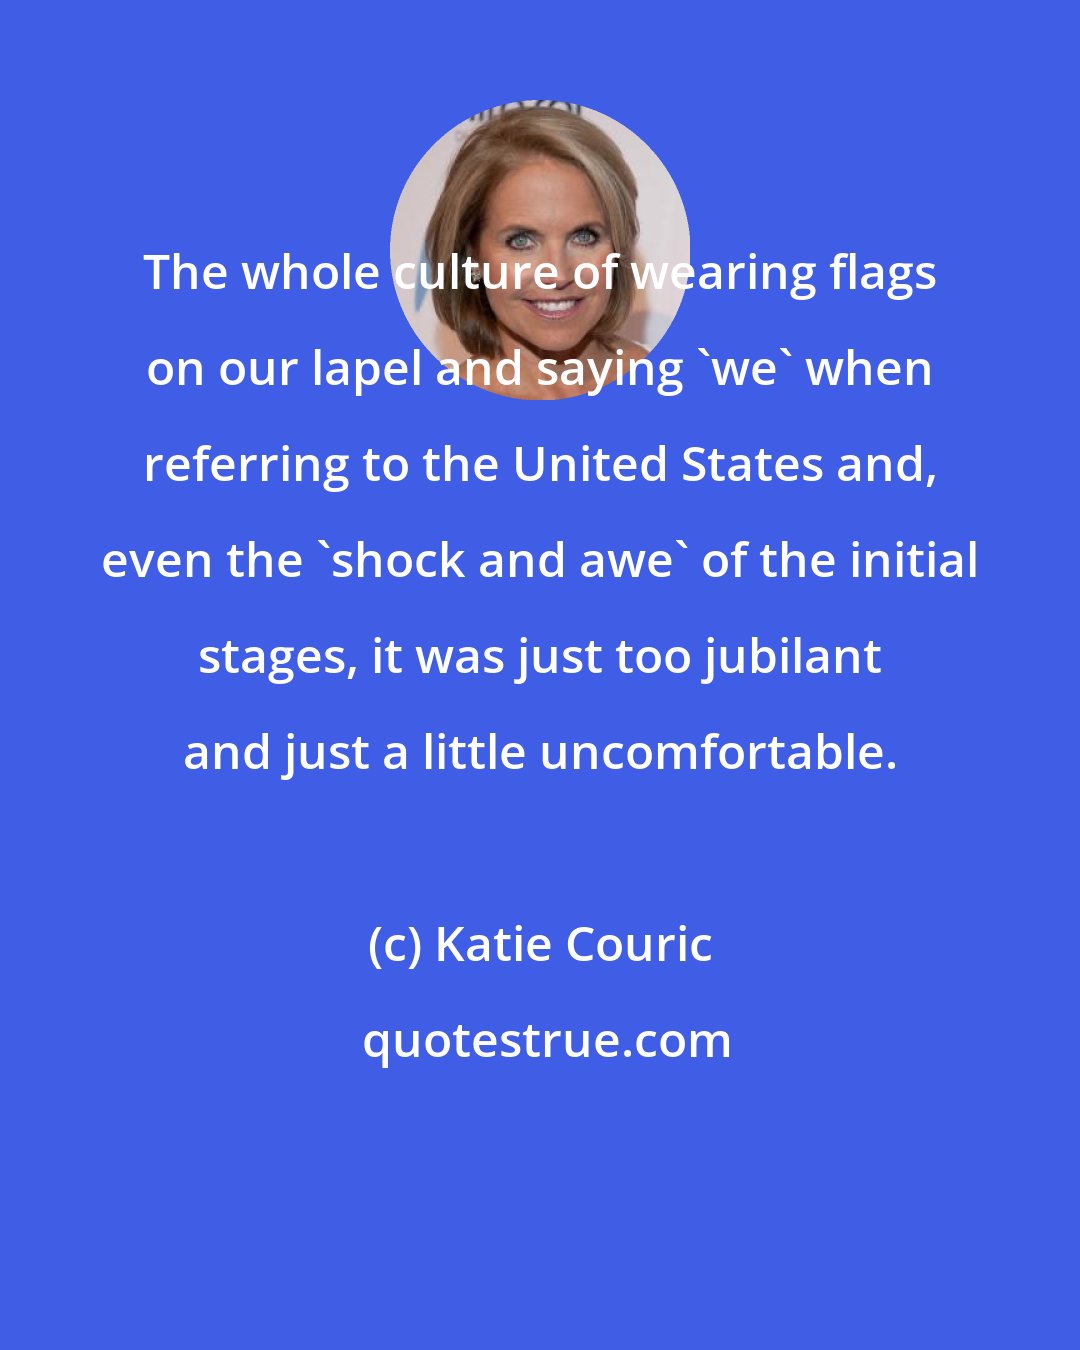 Katie Couric: The whole culture of wearing flags on our lapel and saying 'we' when referring to the United States and, even the 'shock and awe' of the initial stages, it was just too jubilant and just a little uncomfortable.